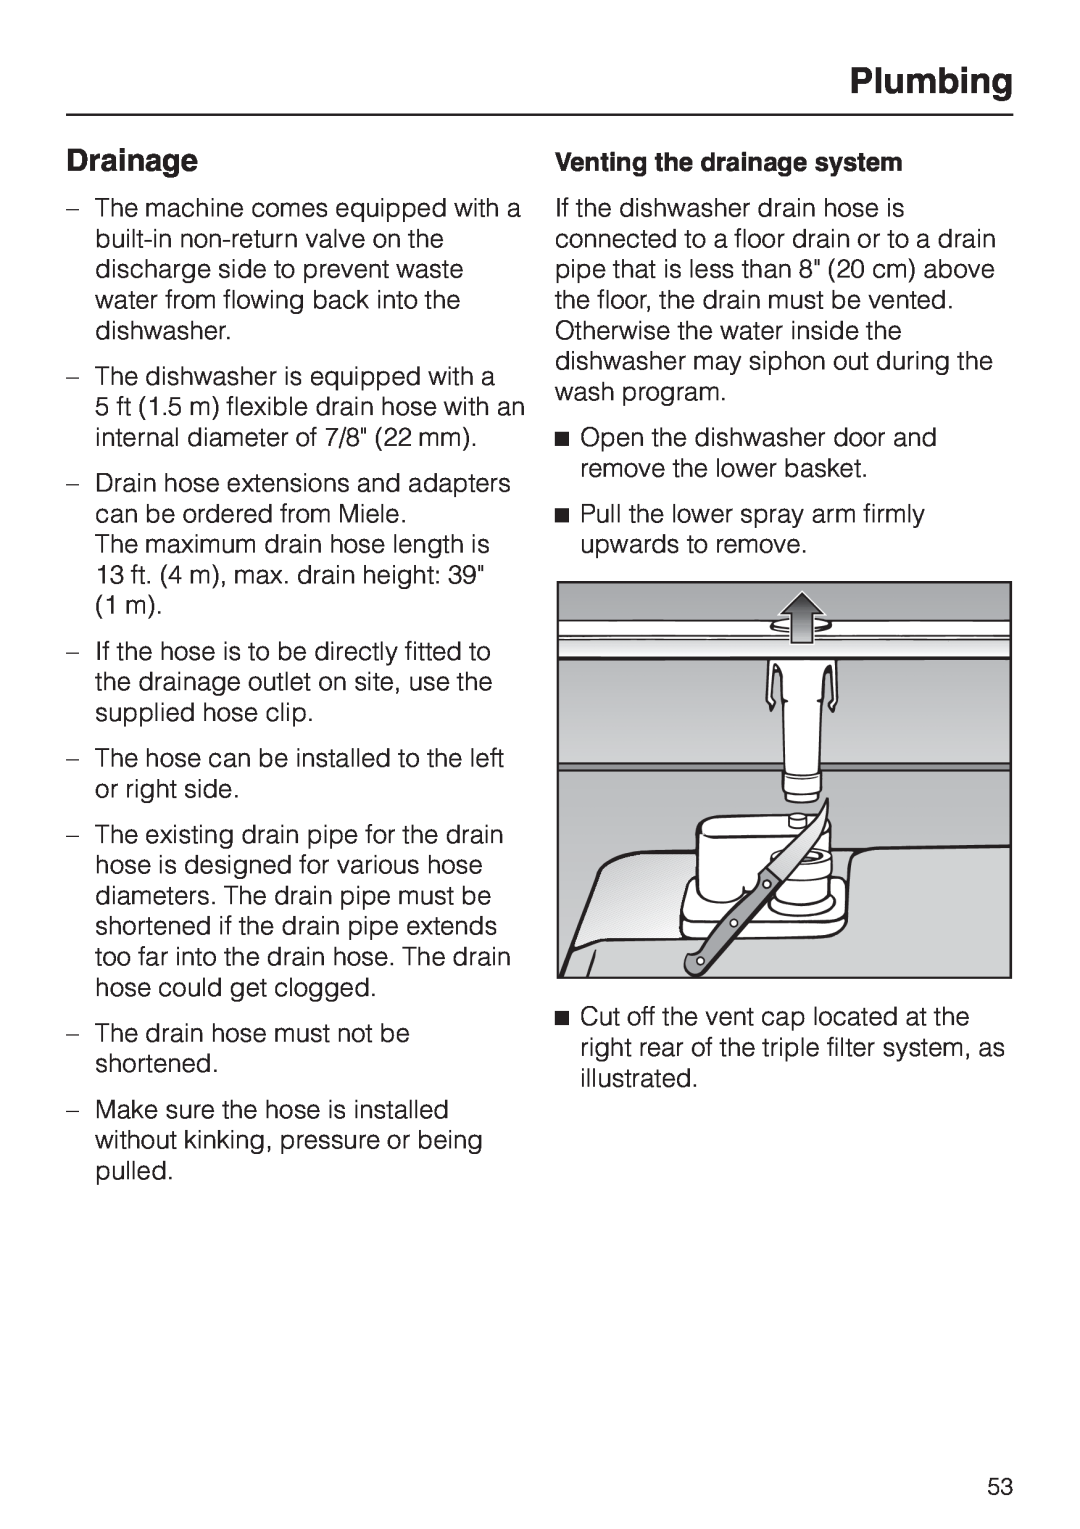 Miele G 2180, G 2170 operating instructions Drainage, Plumbing, Venting the drainage system 